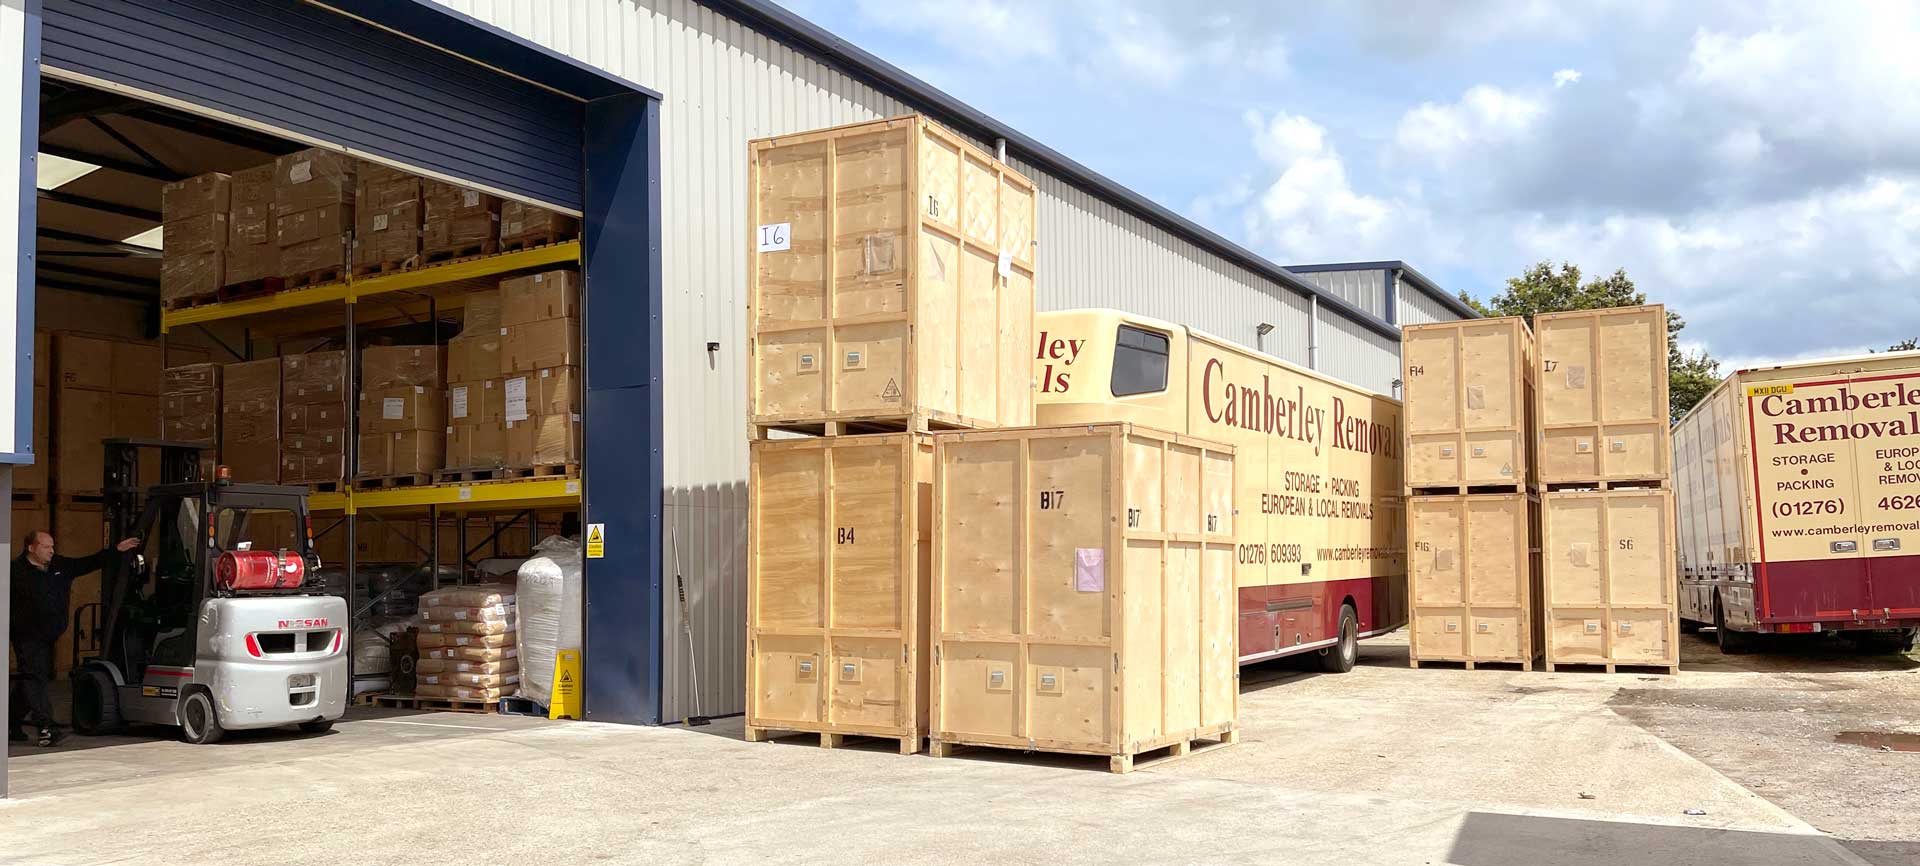 Containers outside Camberley Removals Warehouse